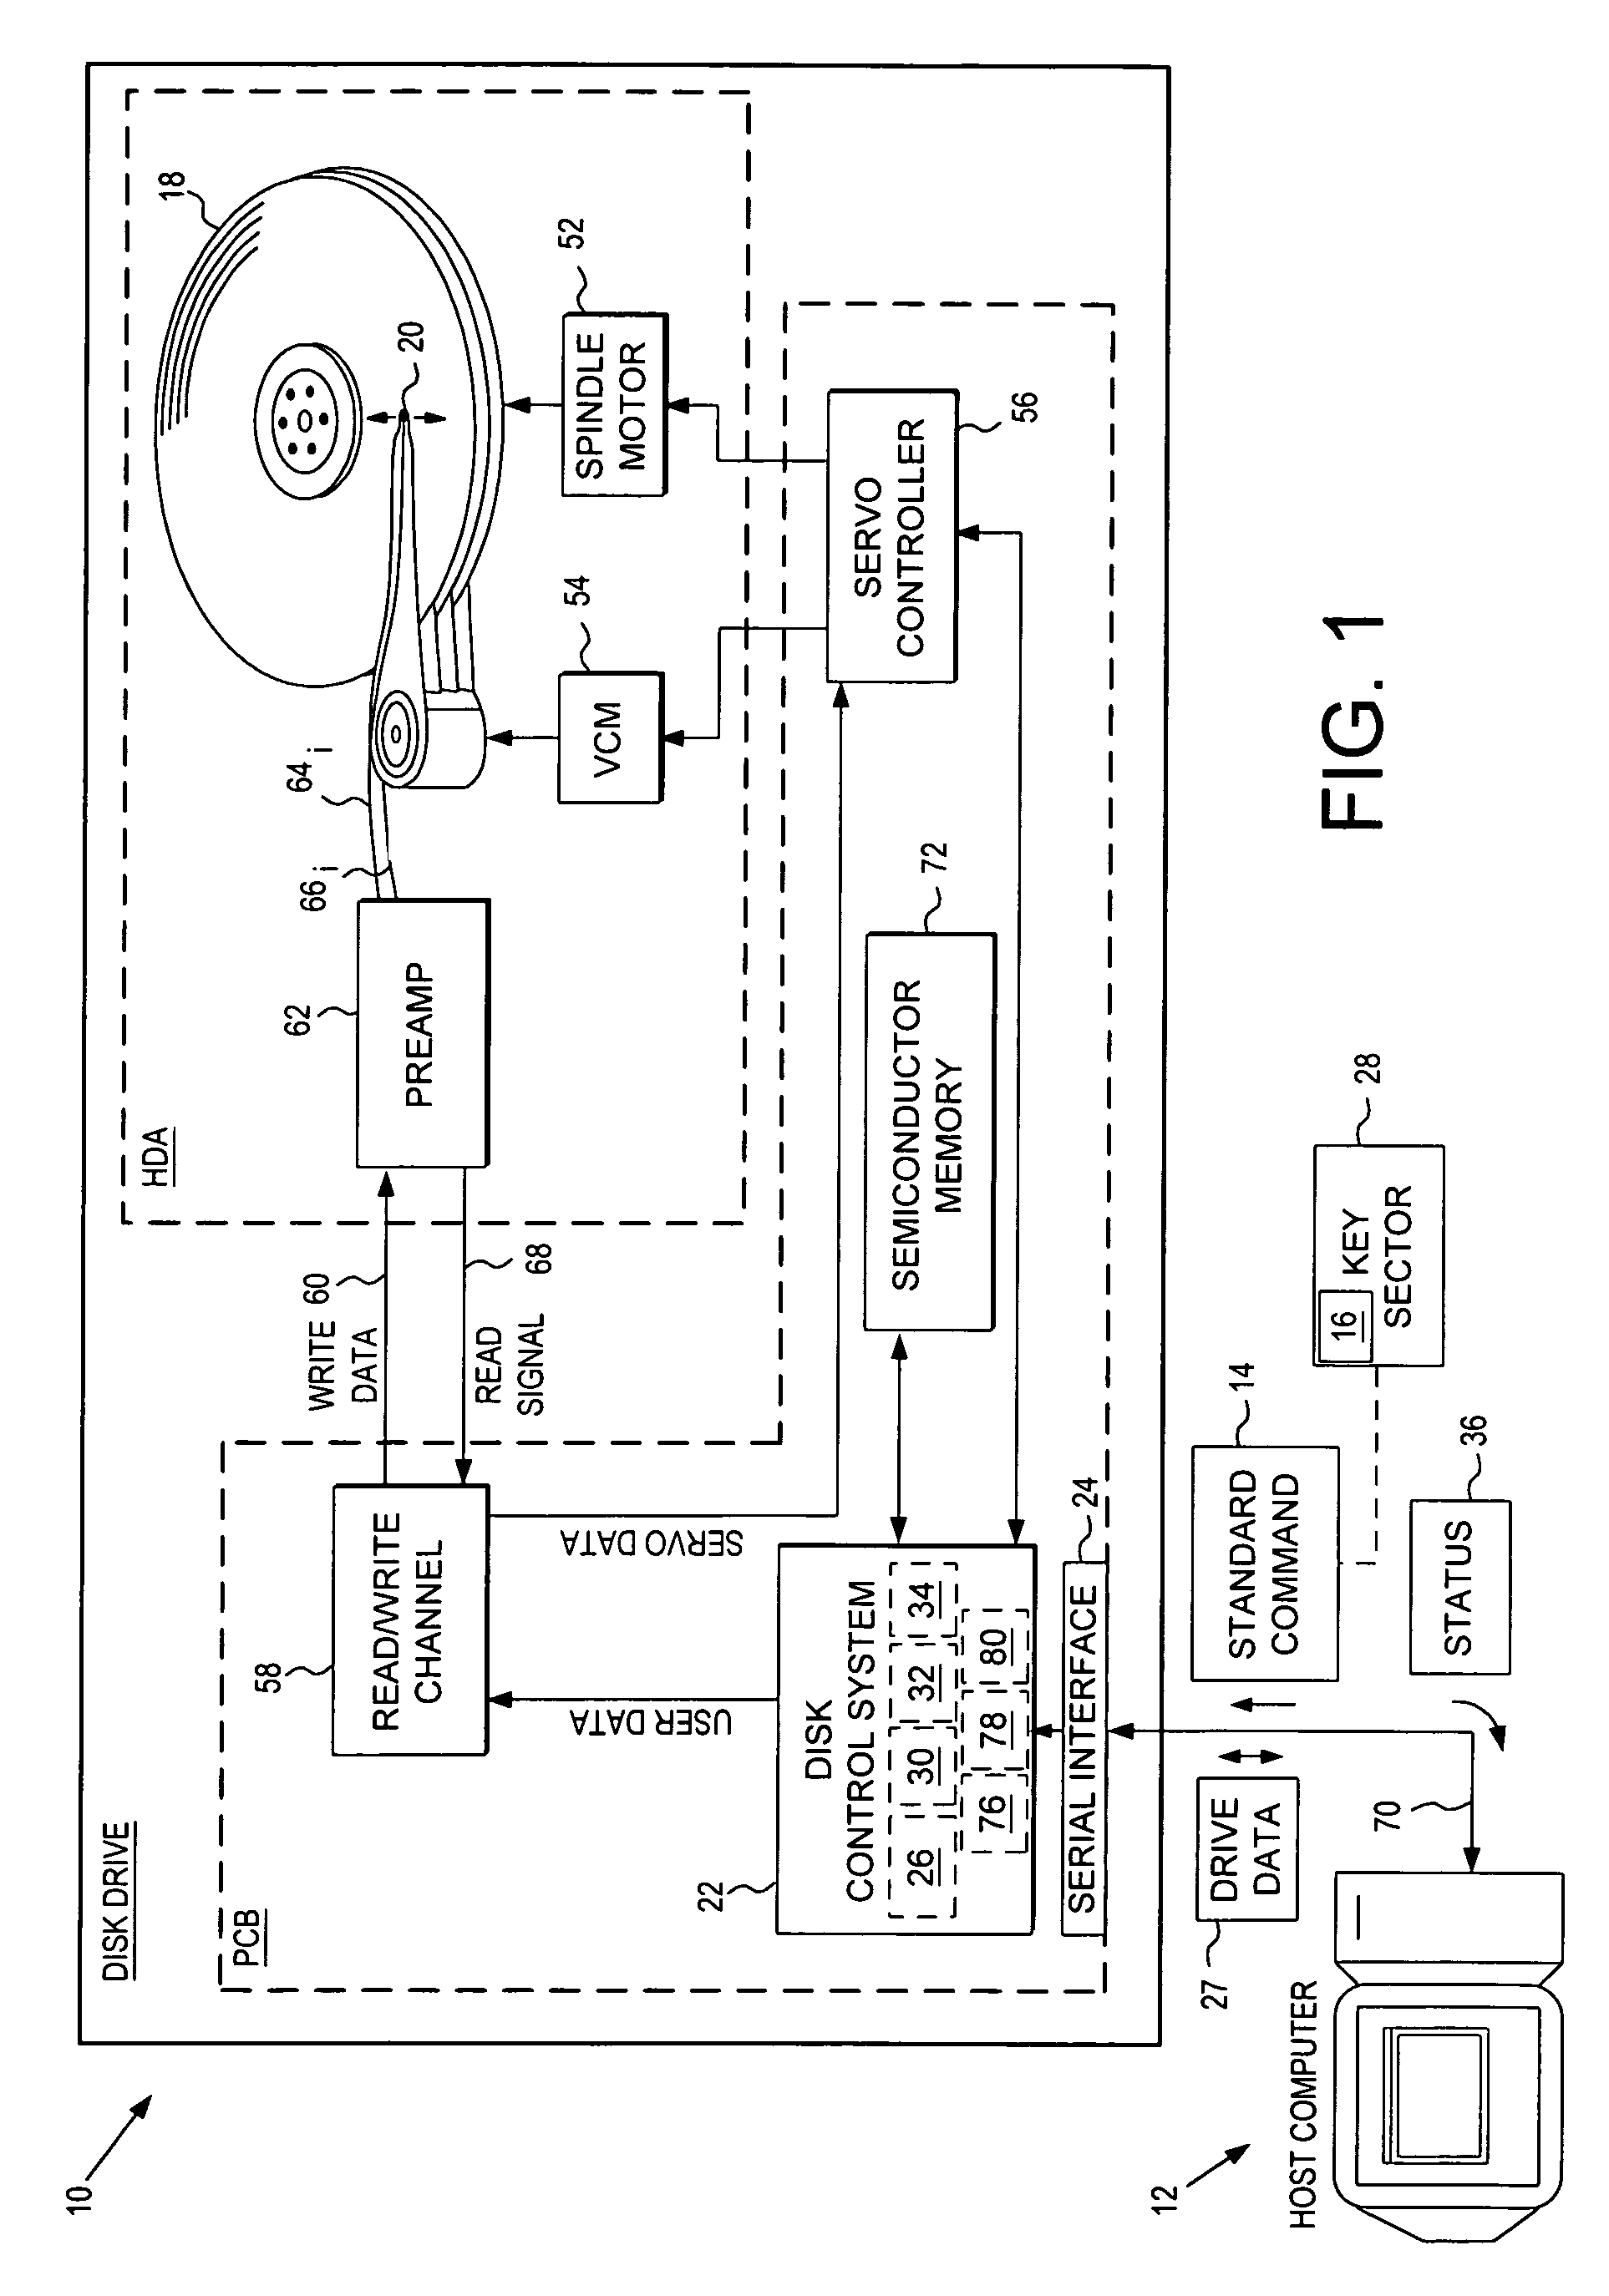 Disk drive and method for data transfer initiated by optional disk-drive commands on a serial interface that only supports standard disk-drive commands